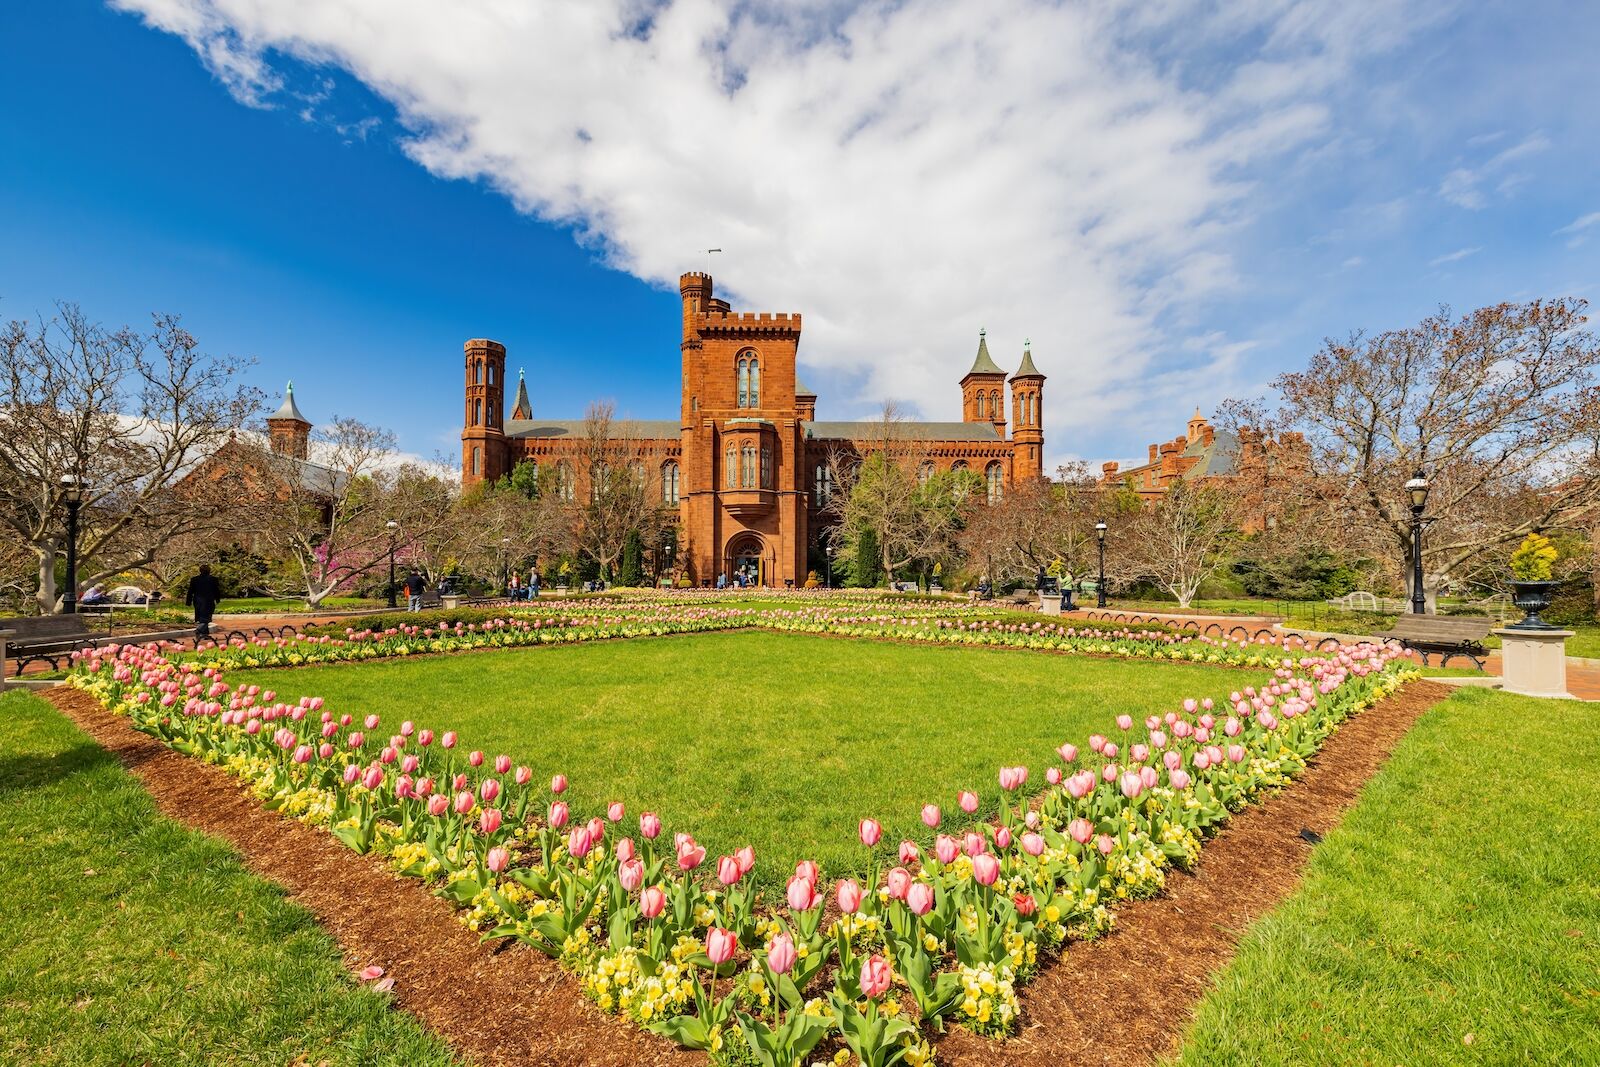 The Enid A. Haupt Garden is one of the Smithsonian Gardens